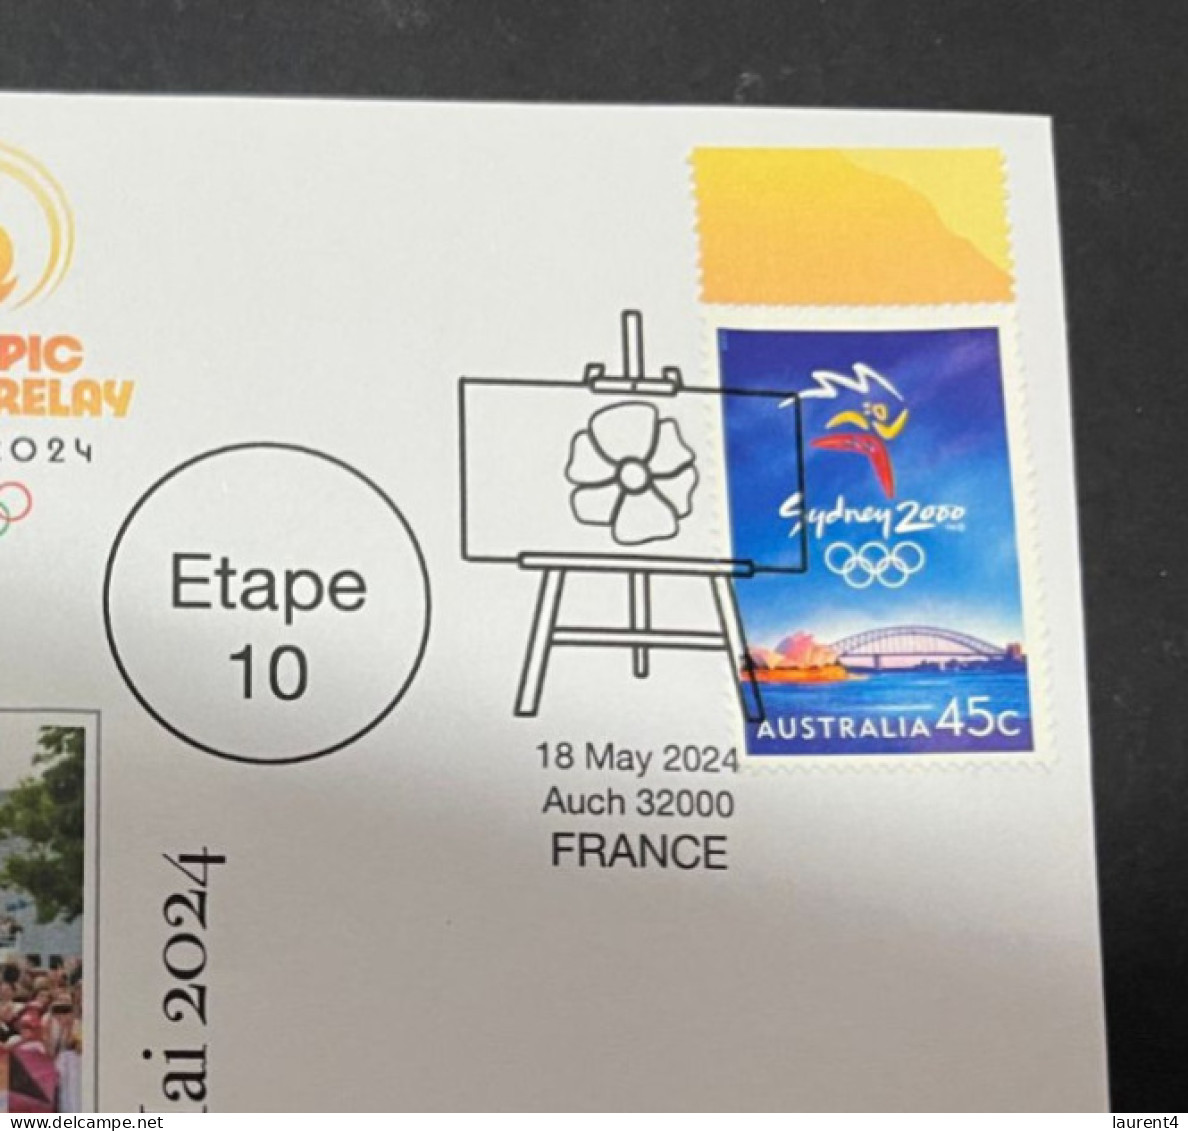 19-5-2024 (5 Z 27) Paris Olympic Games 2024 - Torch Relay (Etape 10) In Auch (18-5-2024) With OLYMPIC Stamp - Sommer 2024: Paris